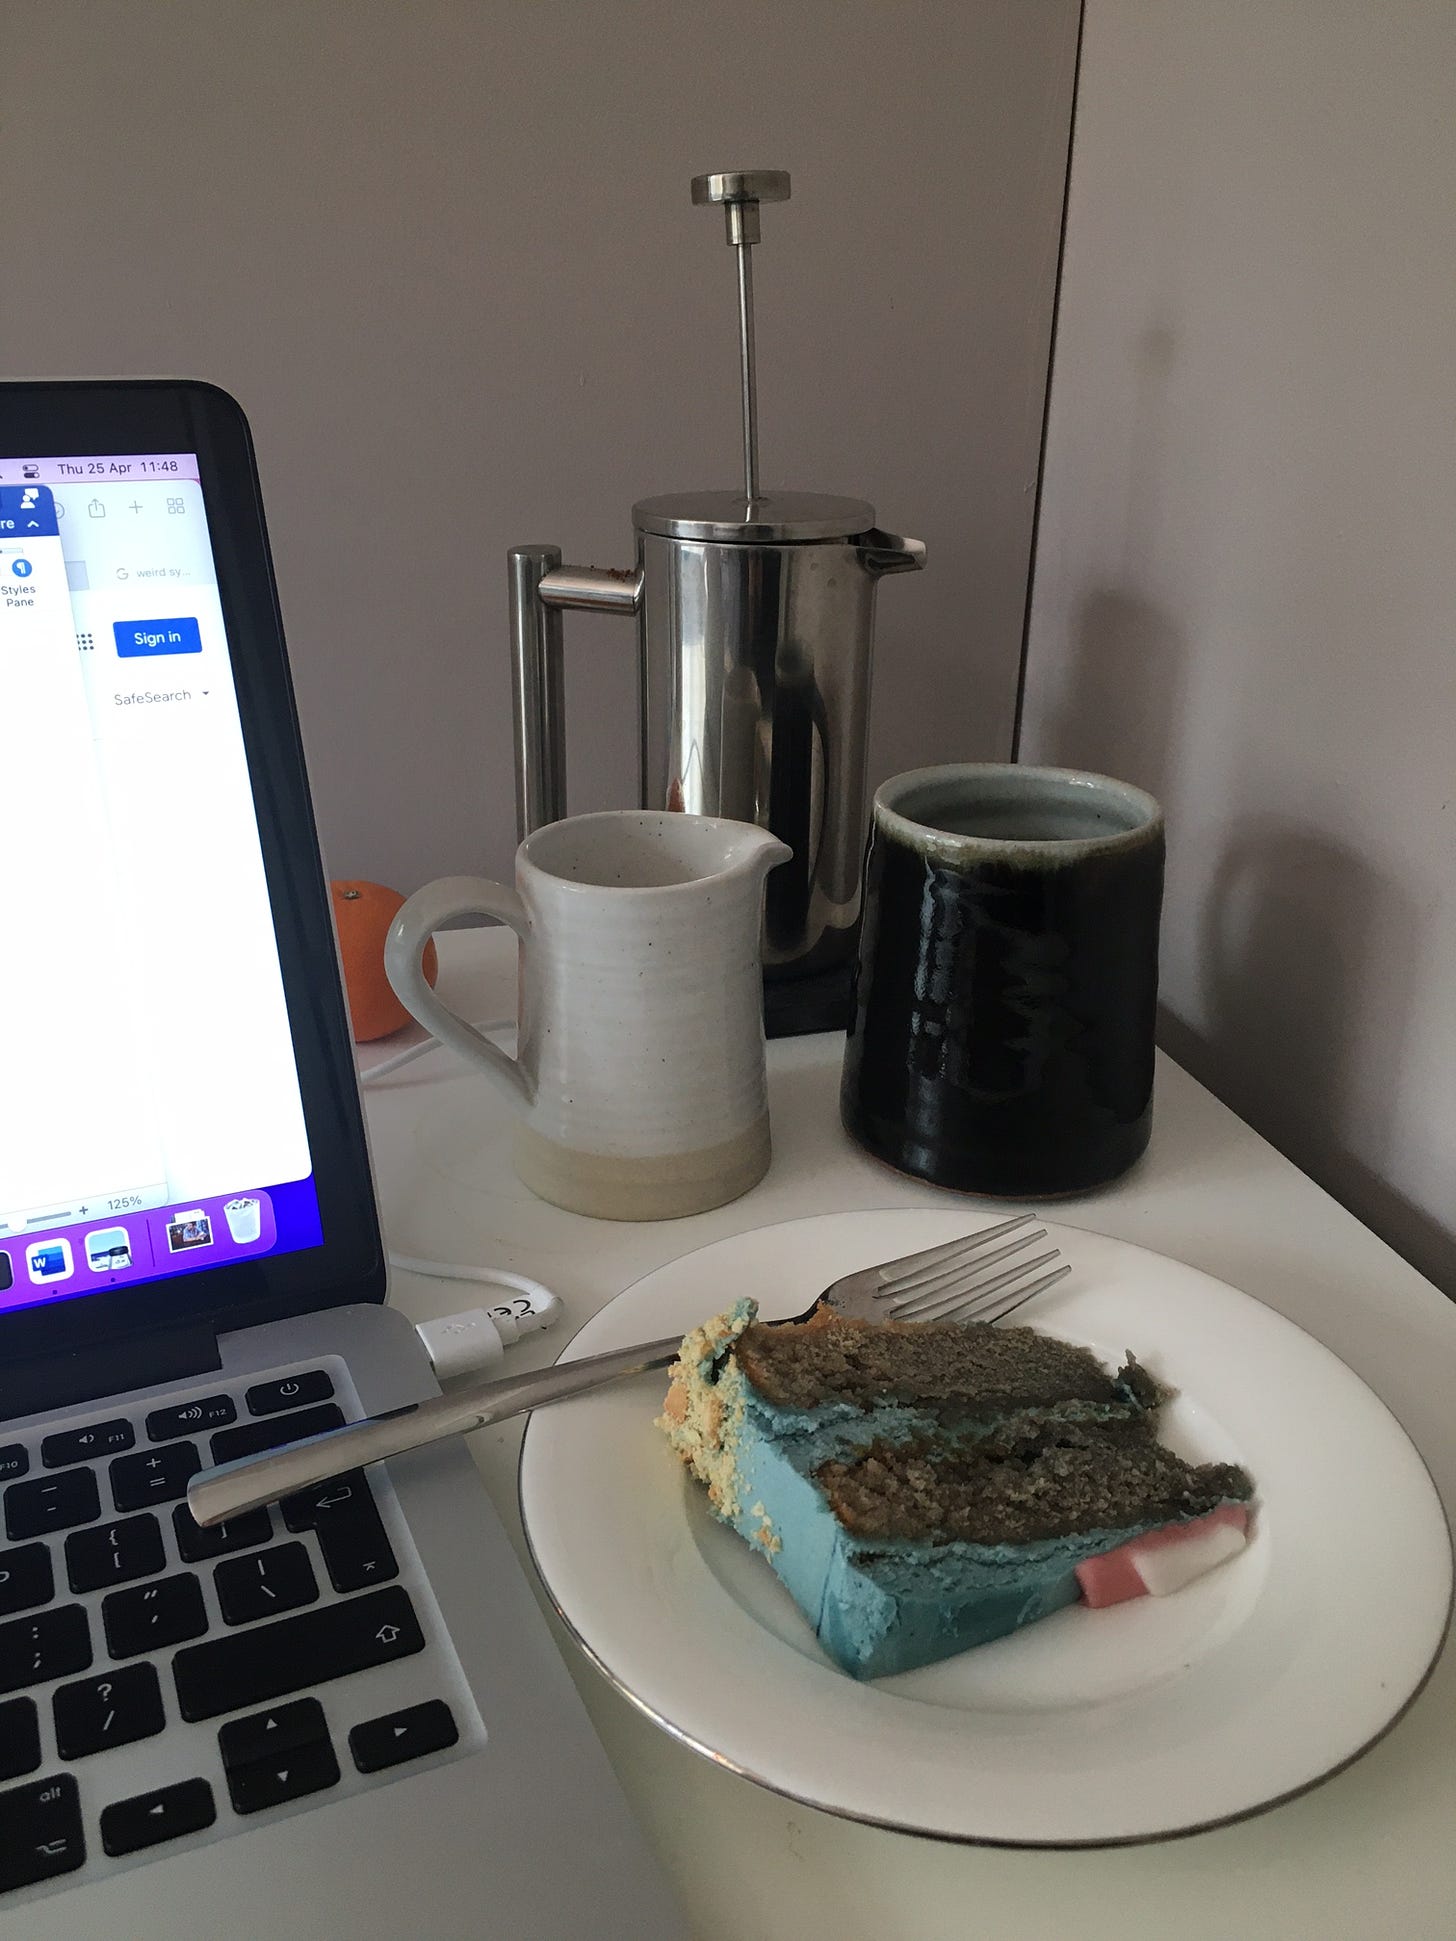 piece of cake with blue icing, coffee cup, milk jug and cafetière next to an open laptop